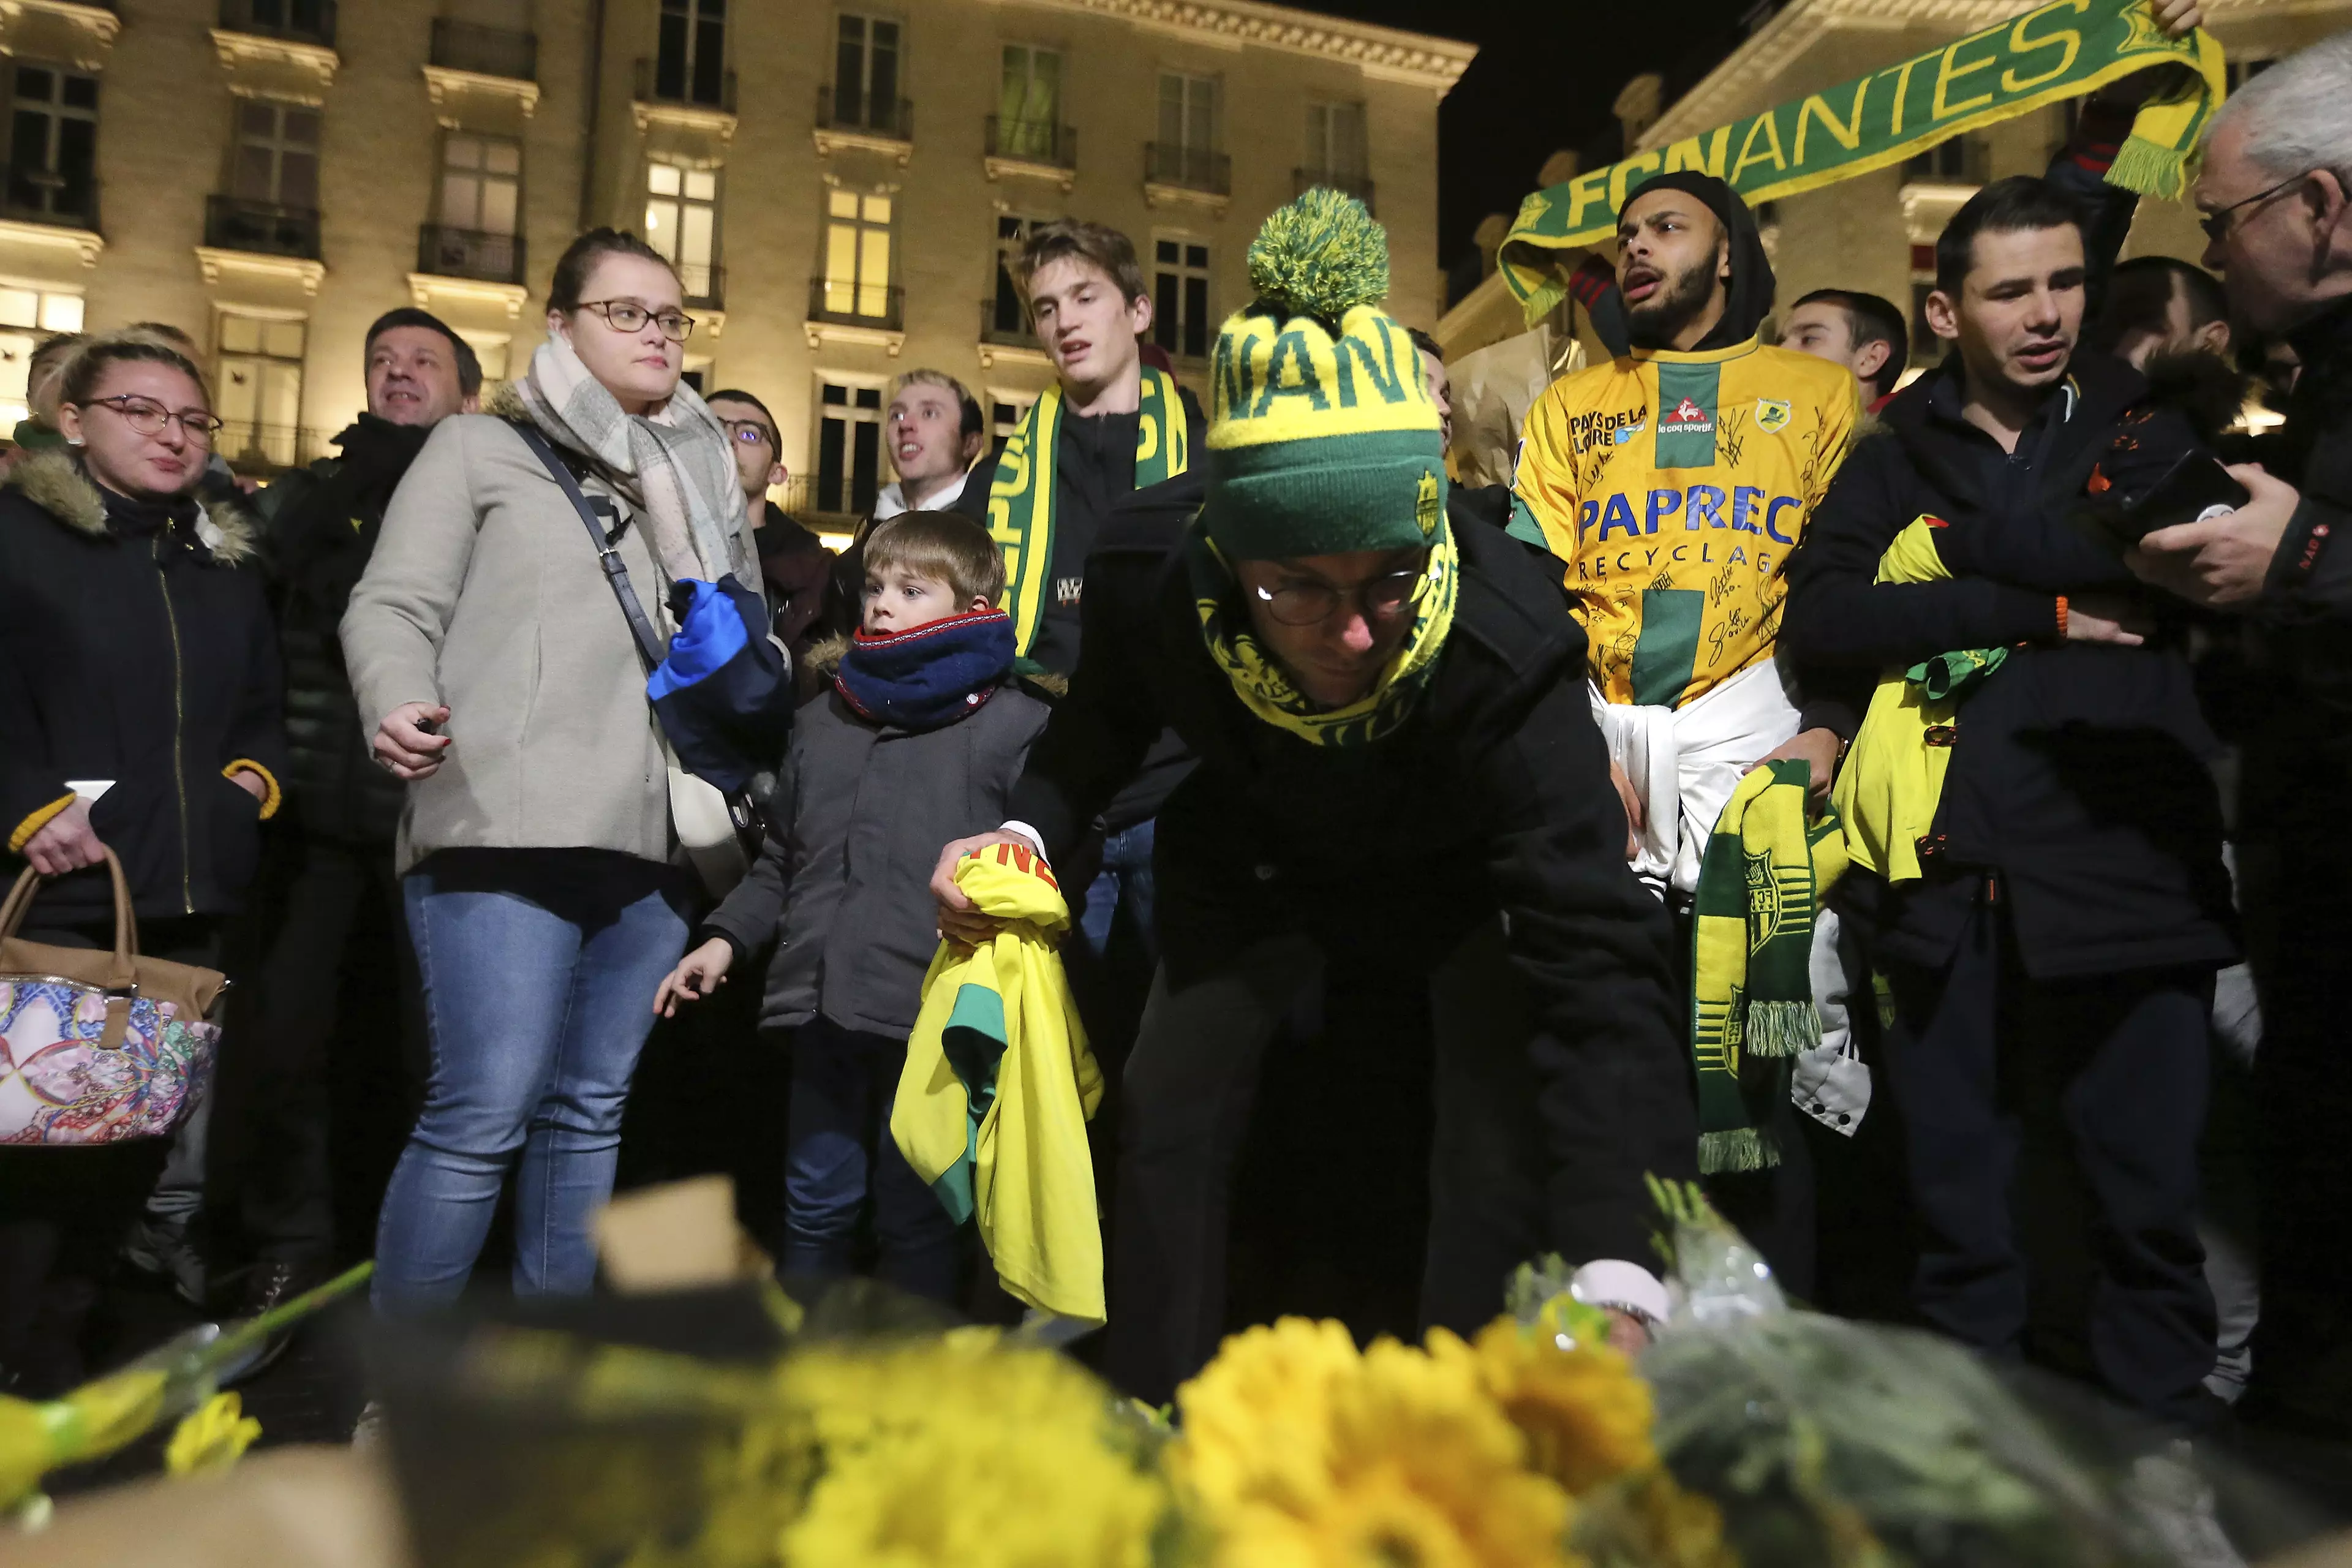 Fans in Nantes came together and hoped for good news.